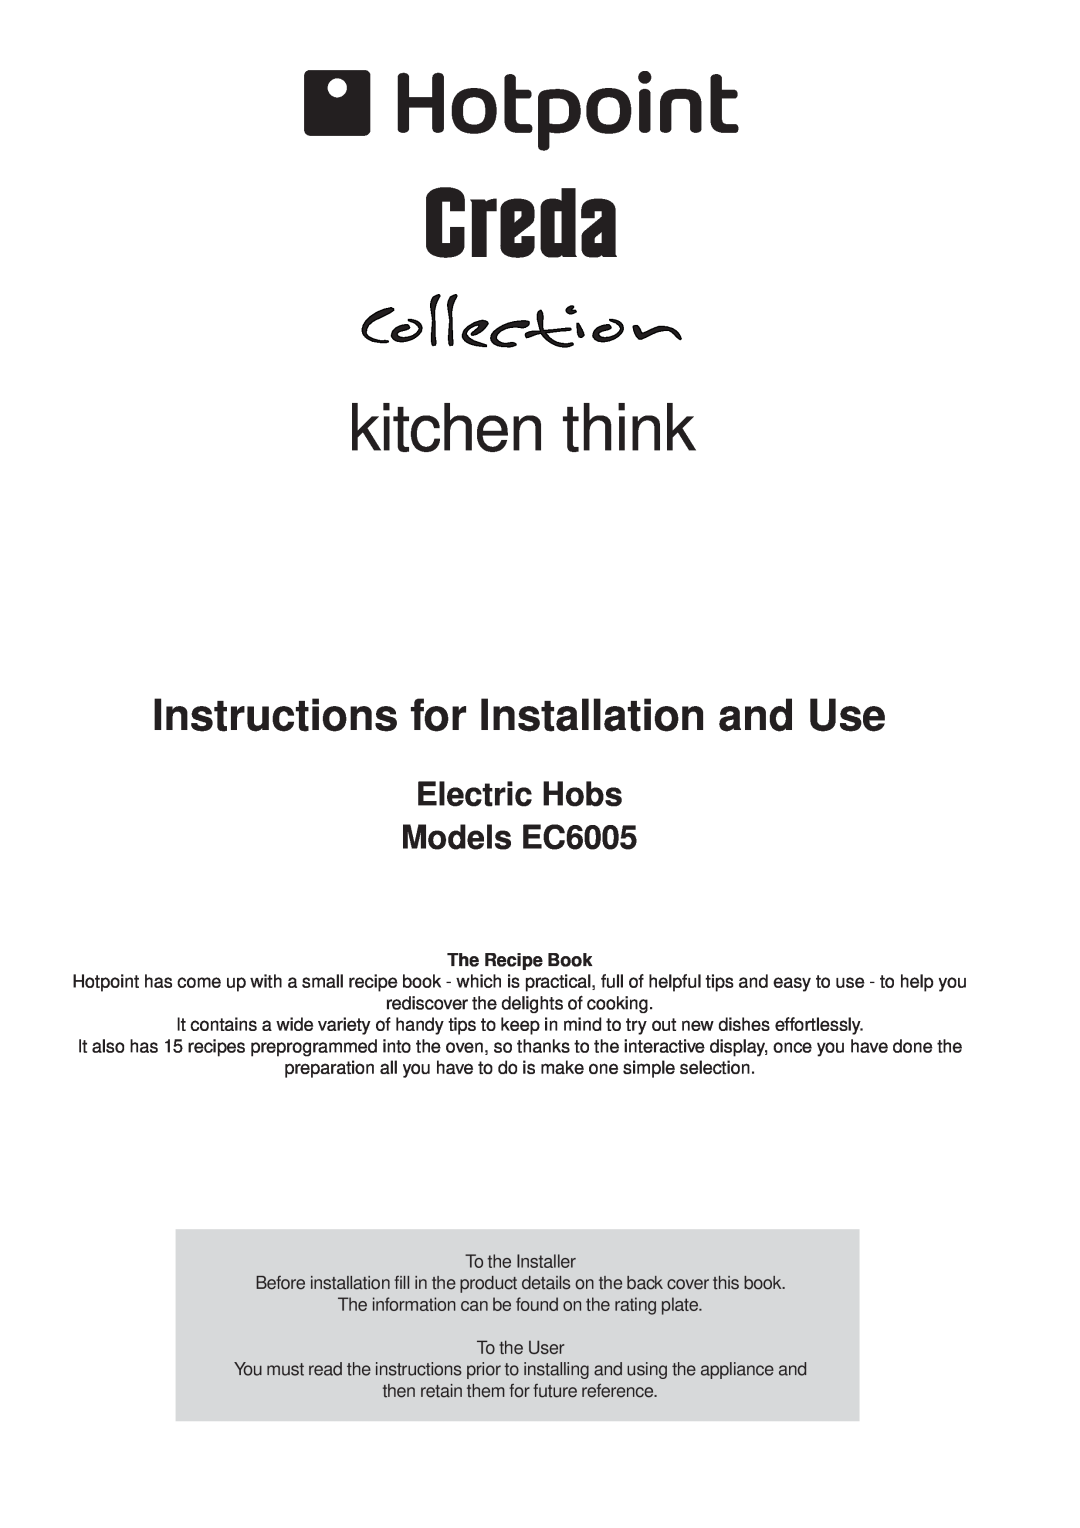 Hotpoint manual Electric Hobs Models EC6005, kitchen think, Instructions for Installation and Use 